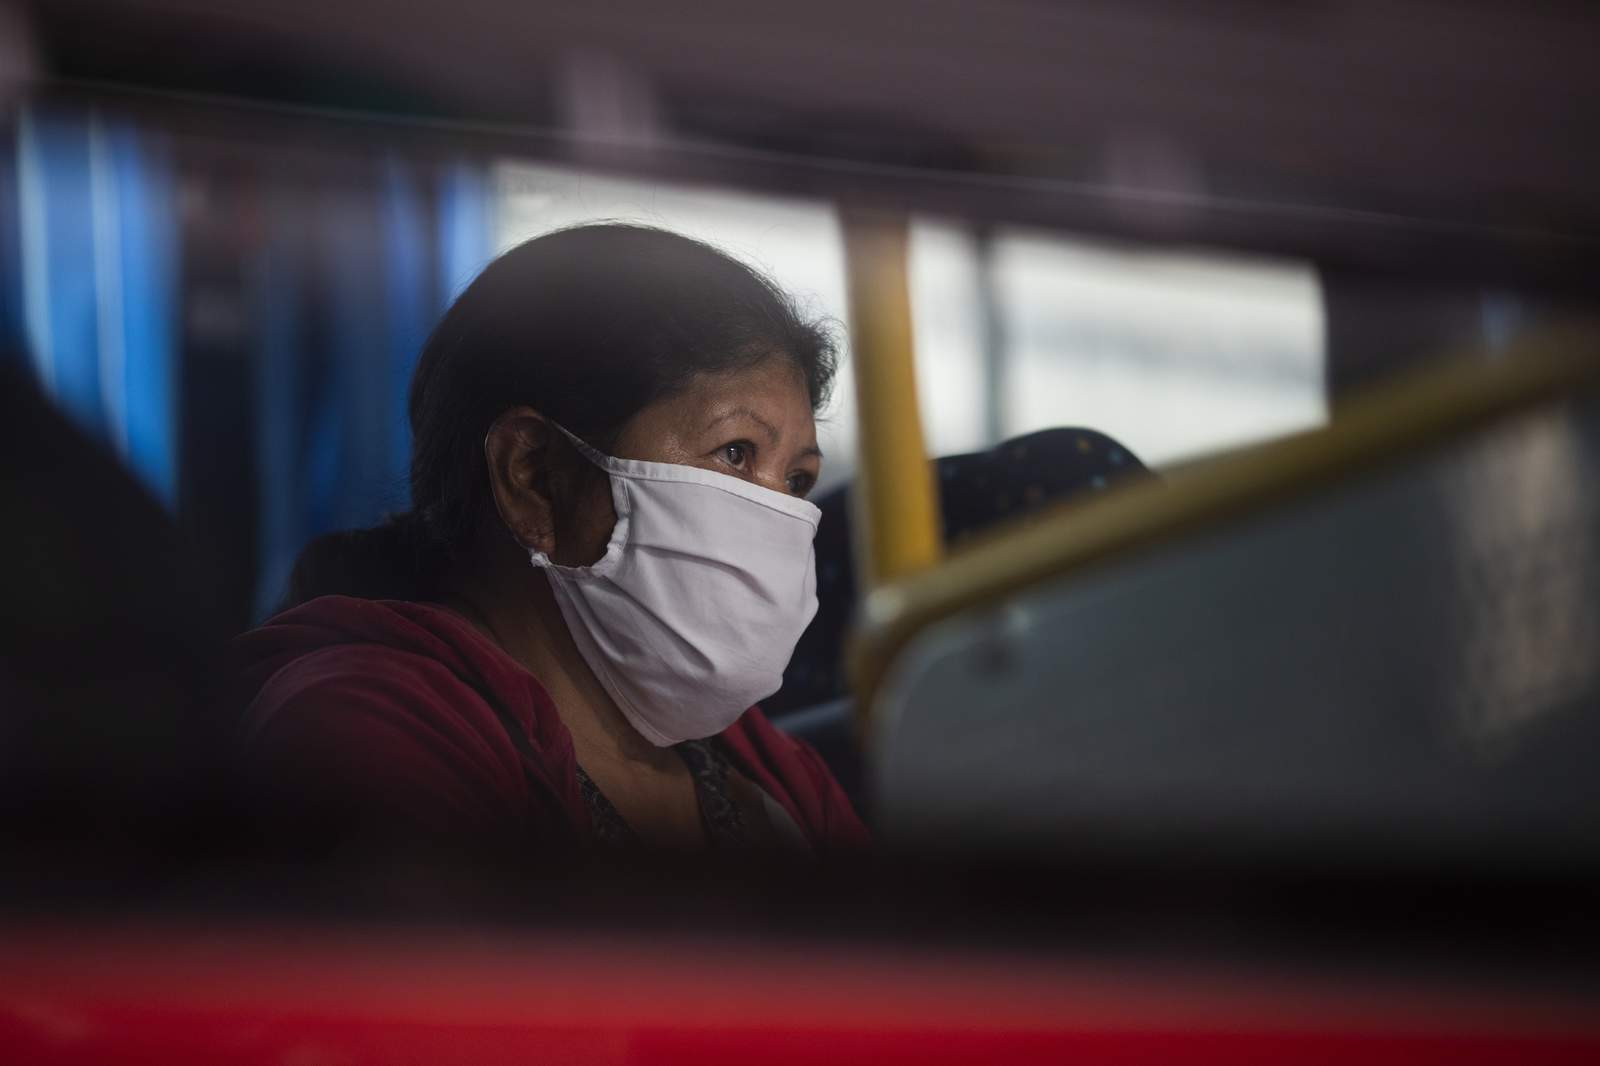 The Latest: India reports another 67,000 coronavirus cases